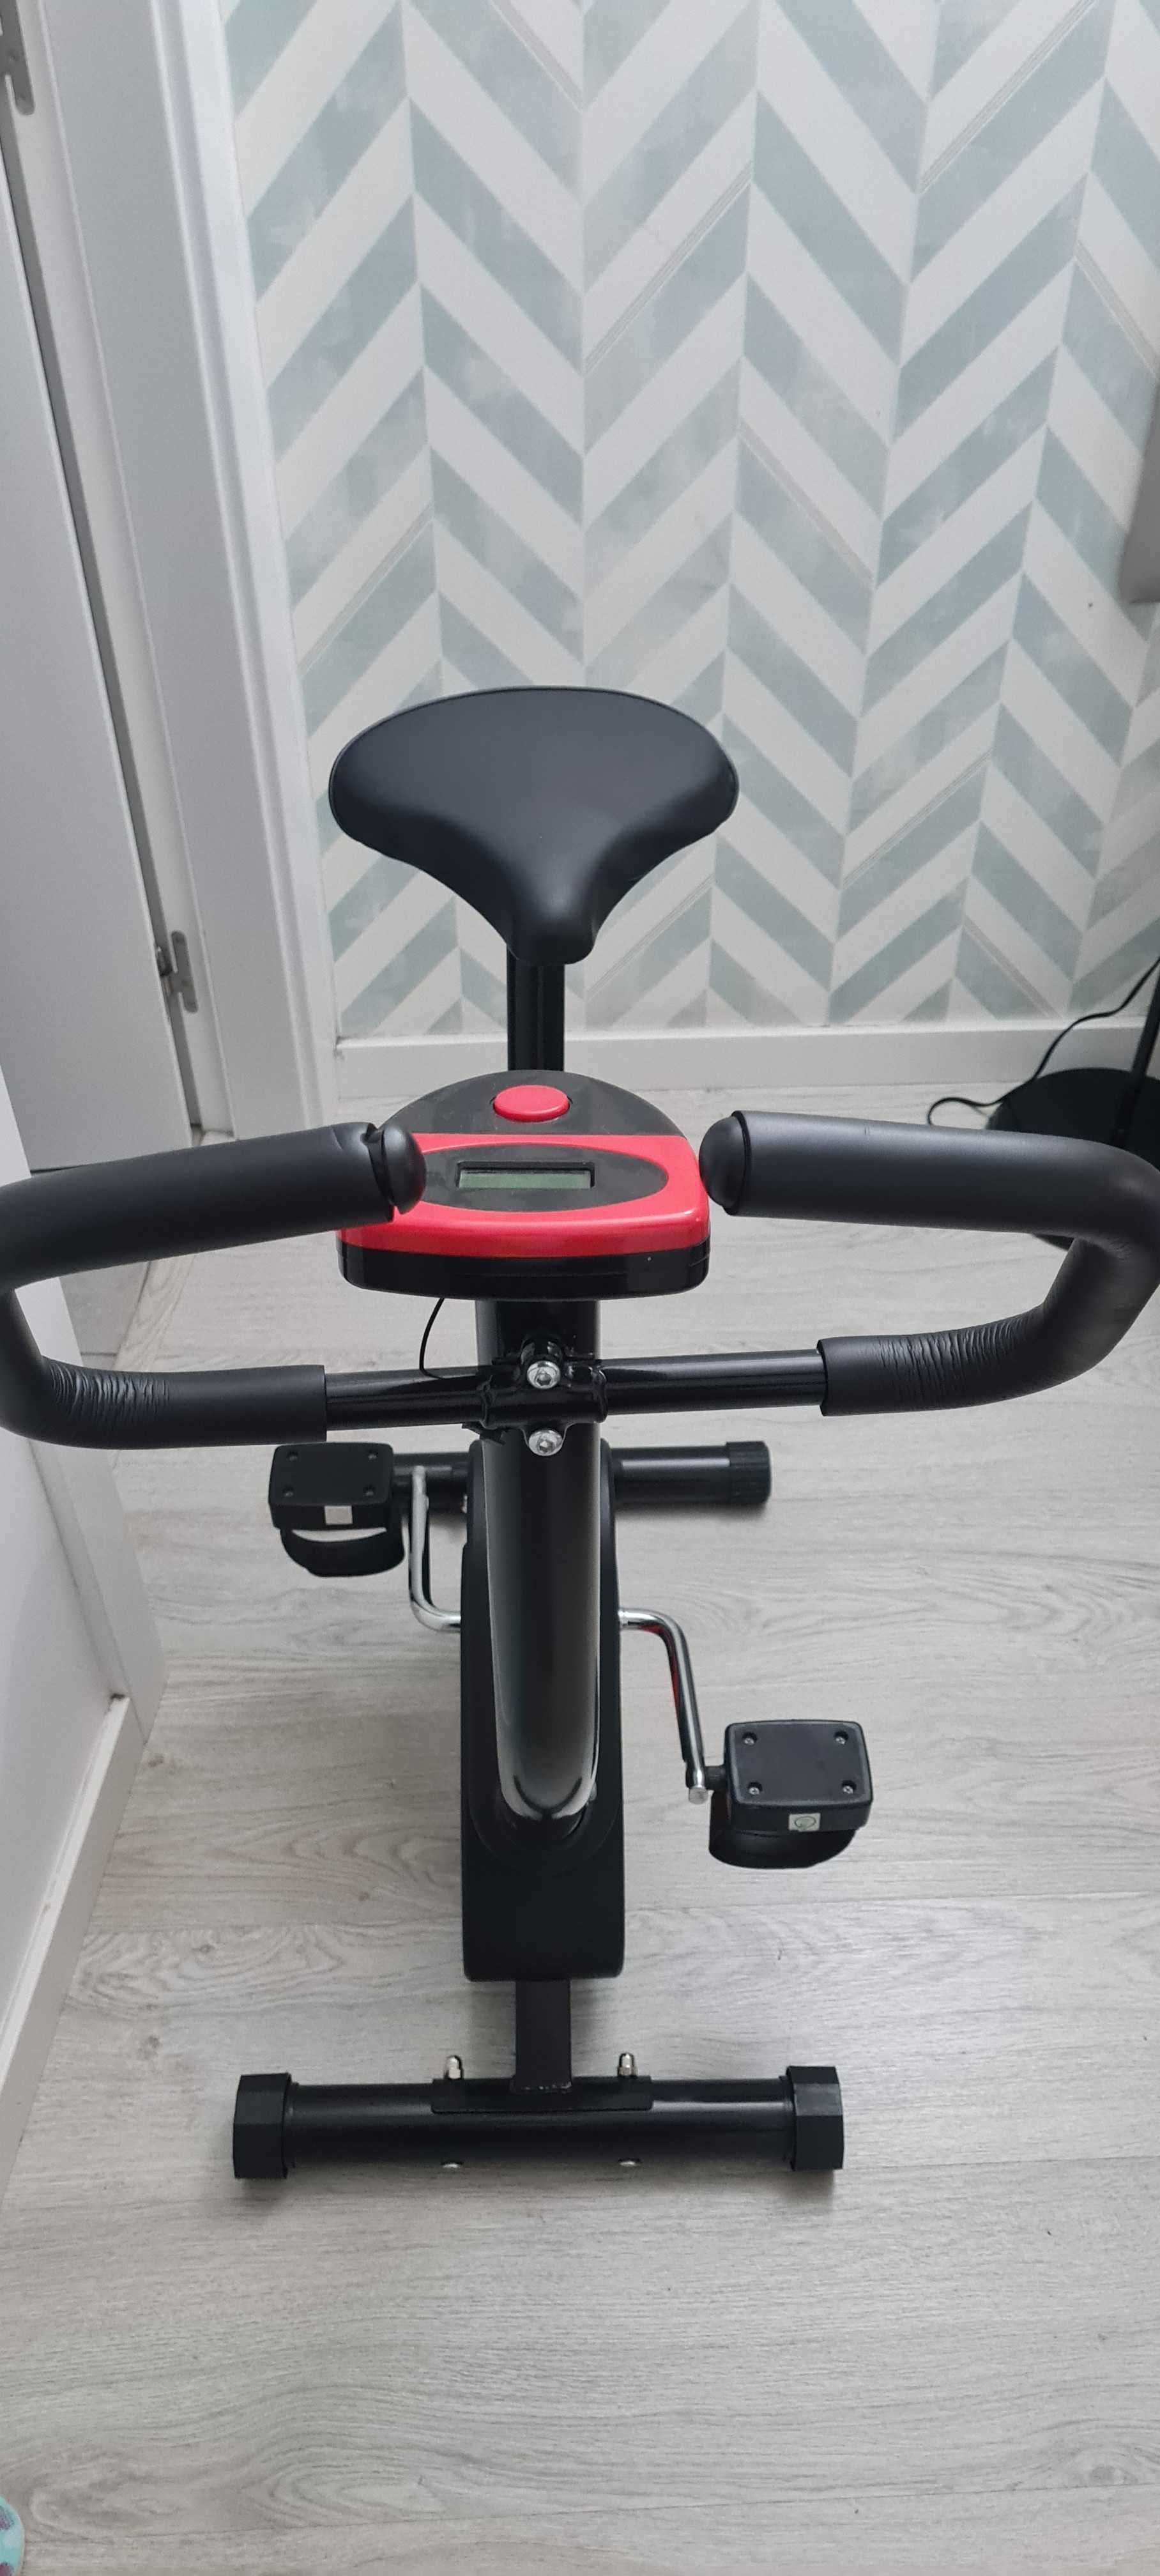 Gym bicycle in a good condition for sale